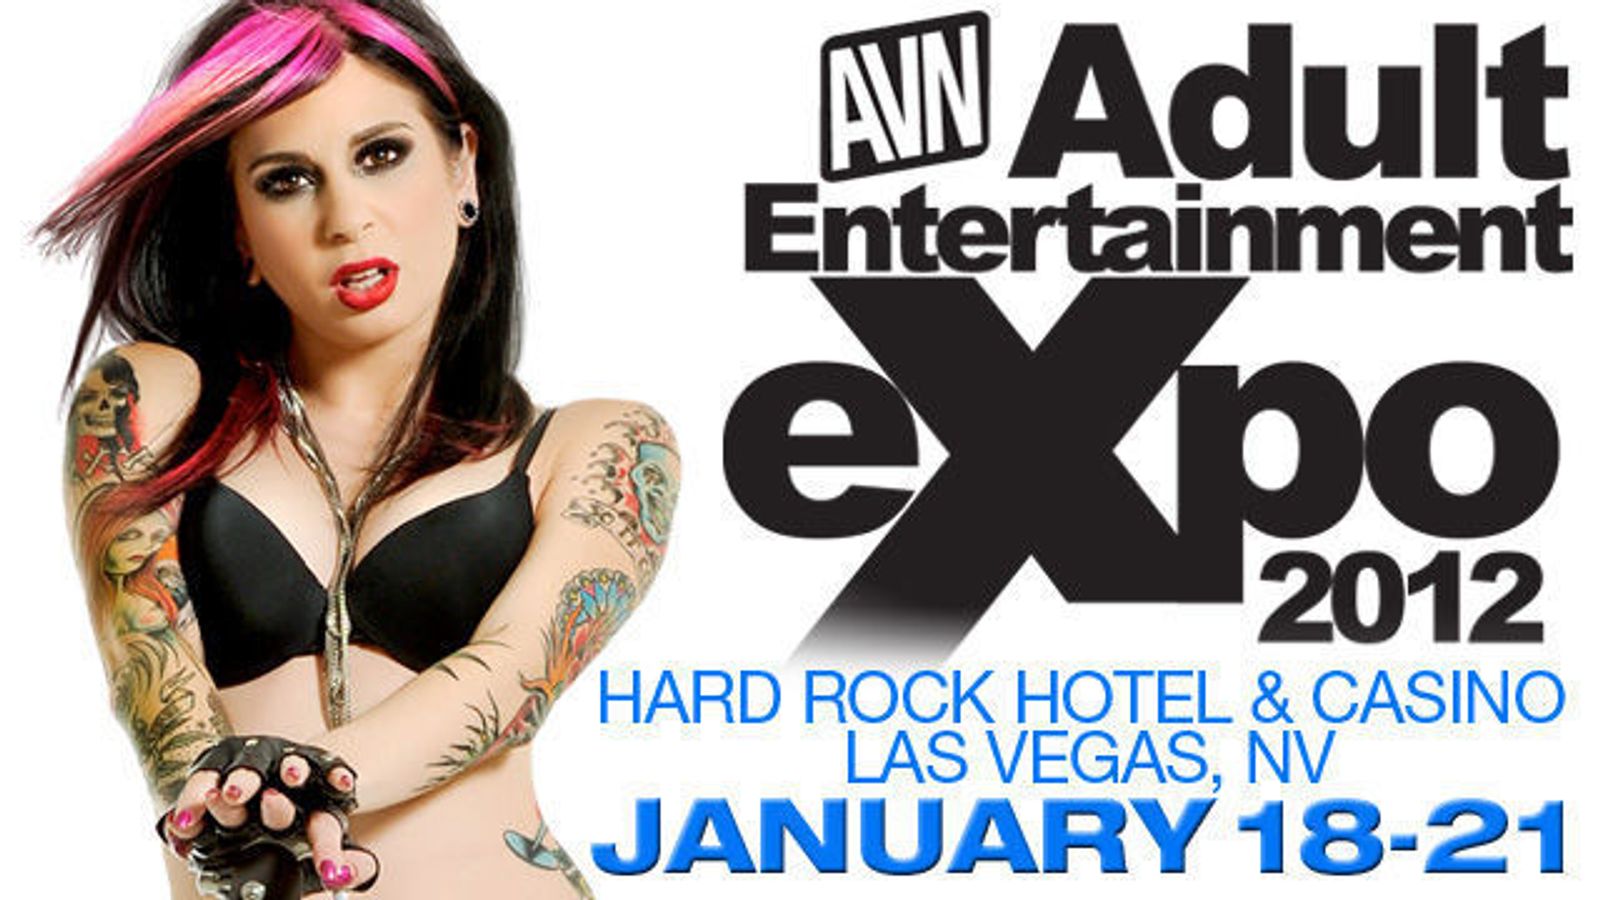 Exhibitor Space for Adult Entertainment Expo is Sold Out